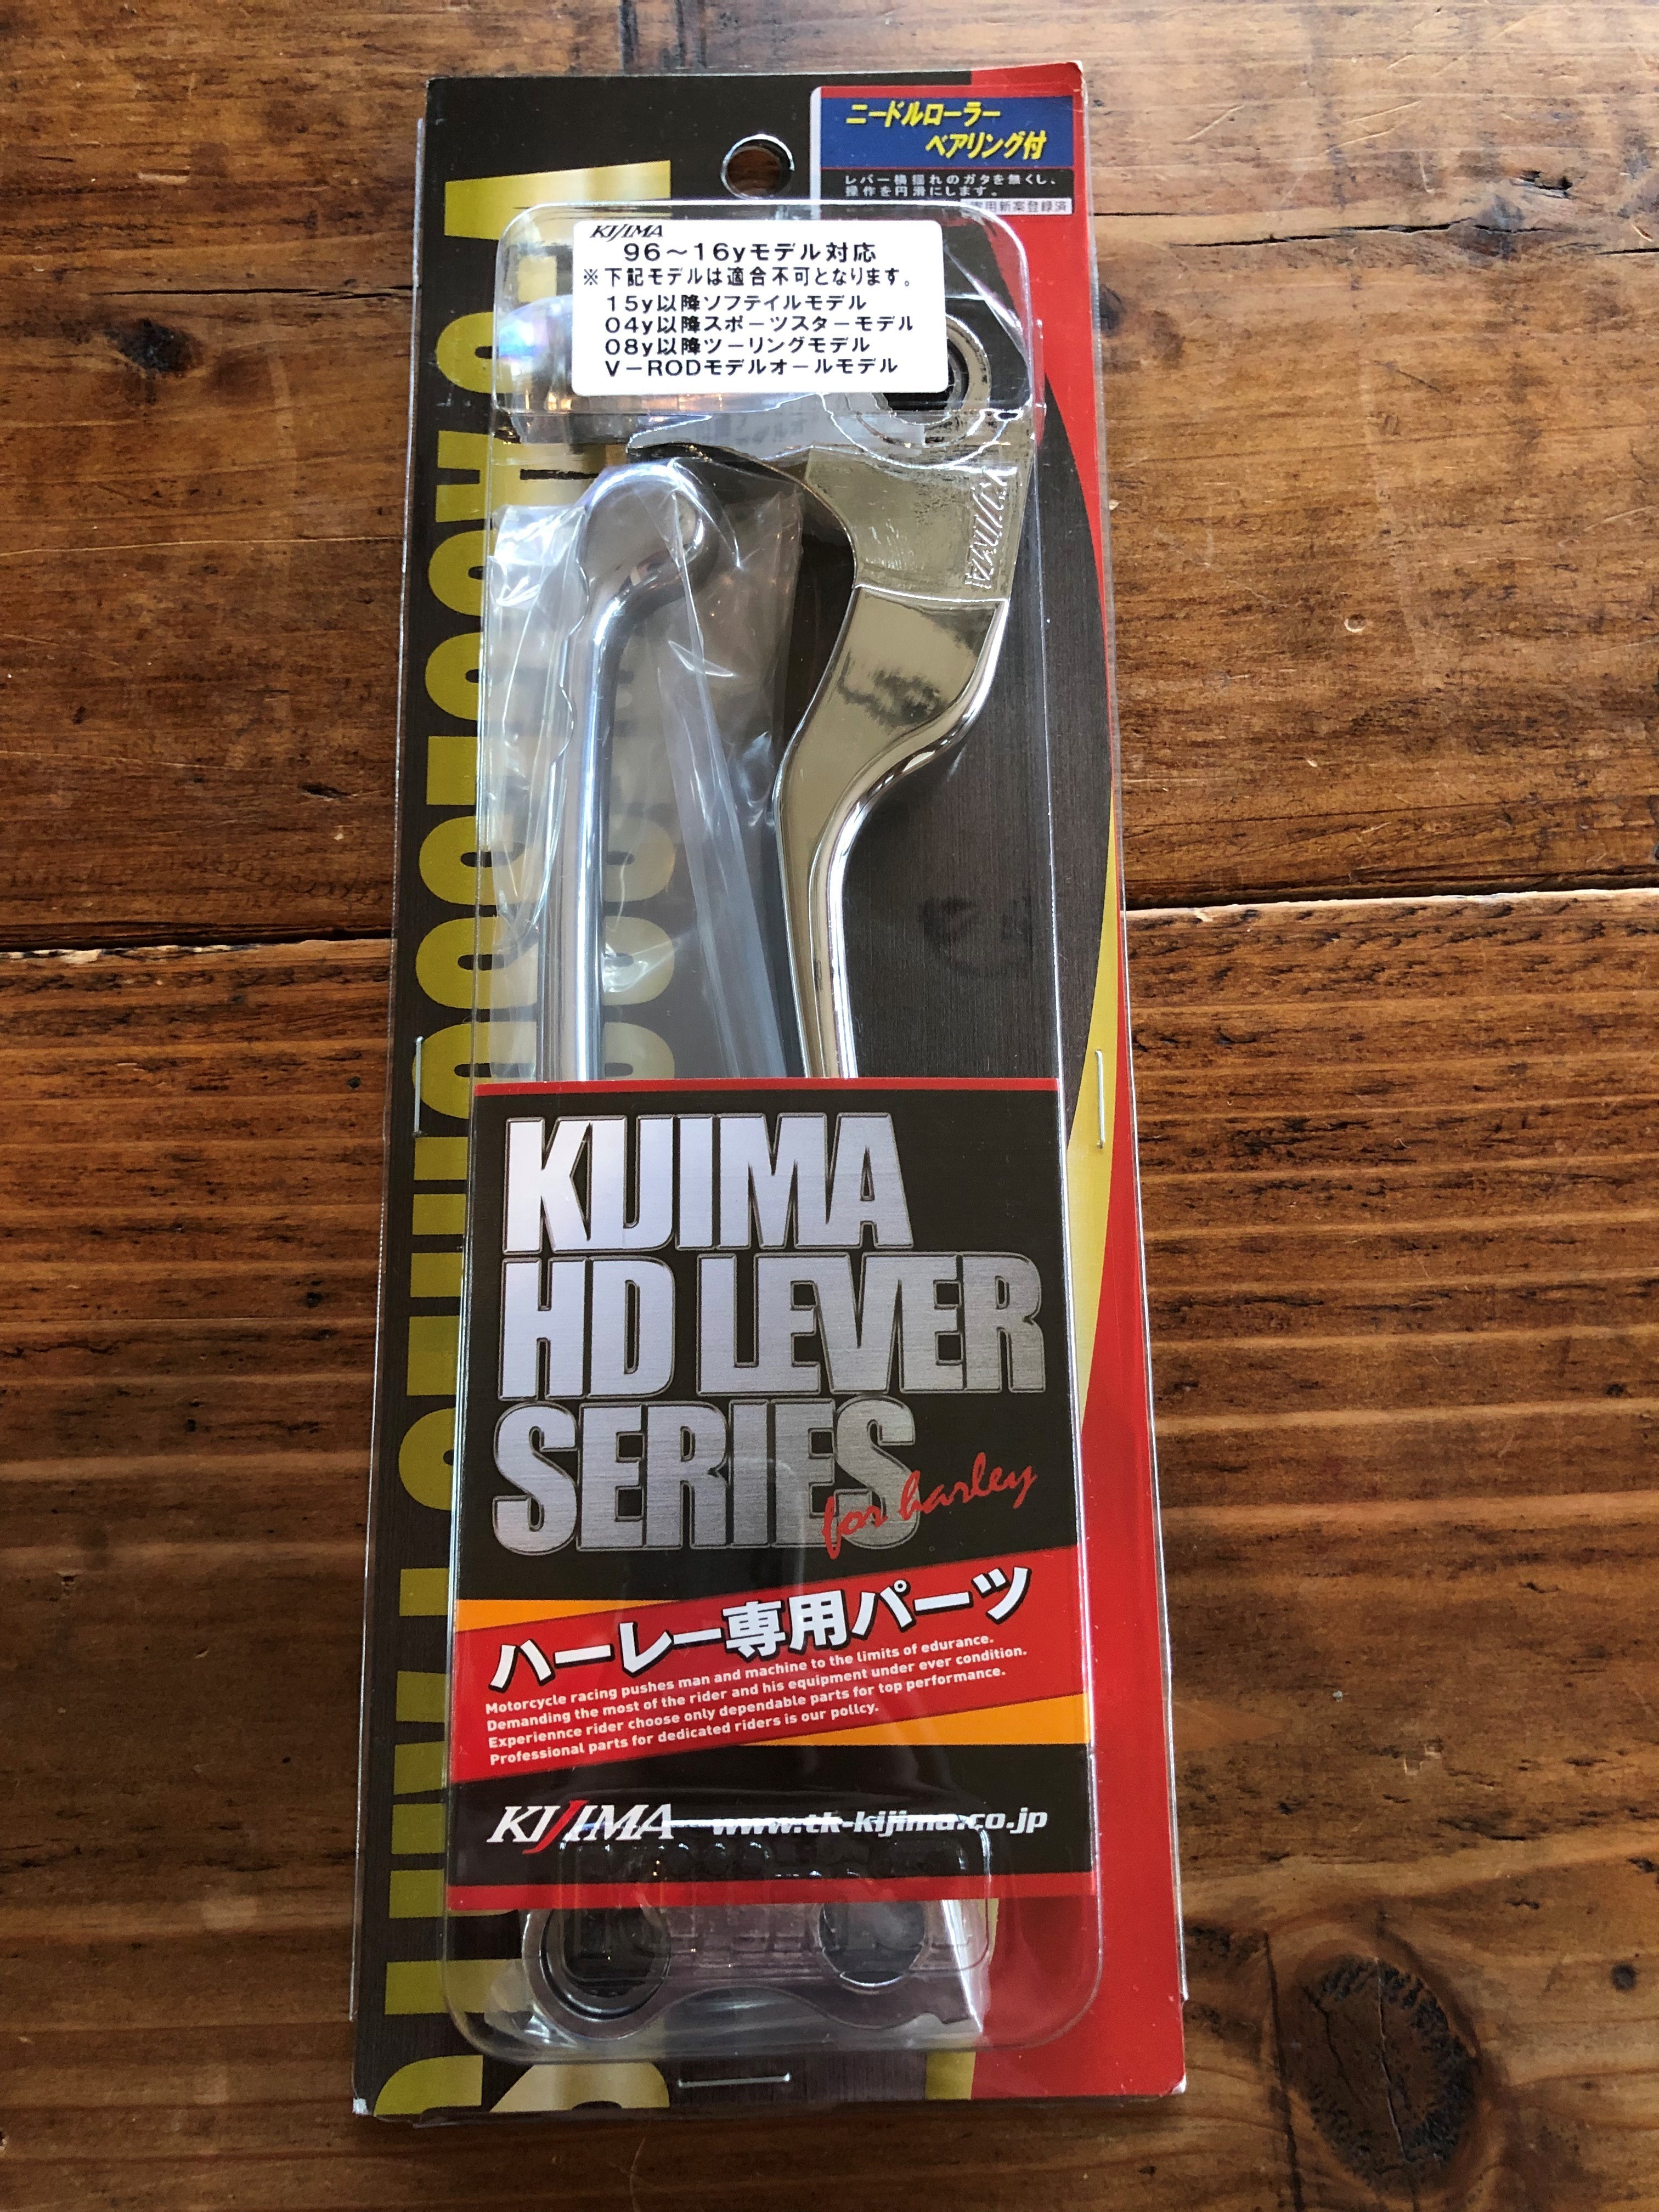 replace-the-lever-of-the-motorcycle-kijima.jpg